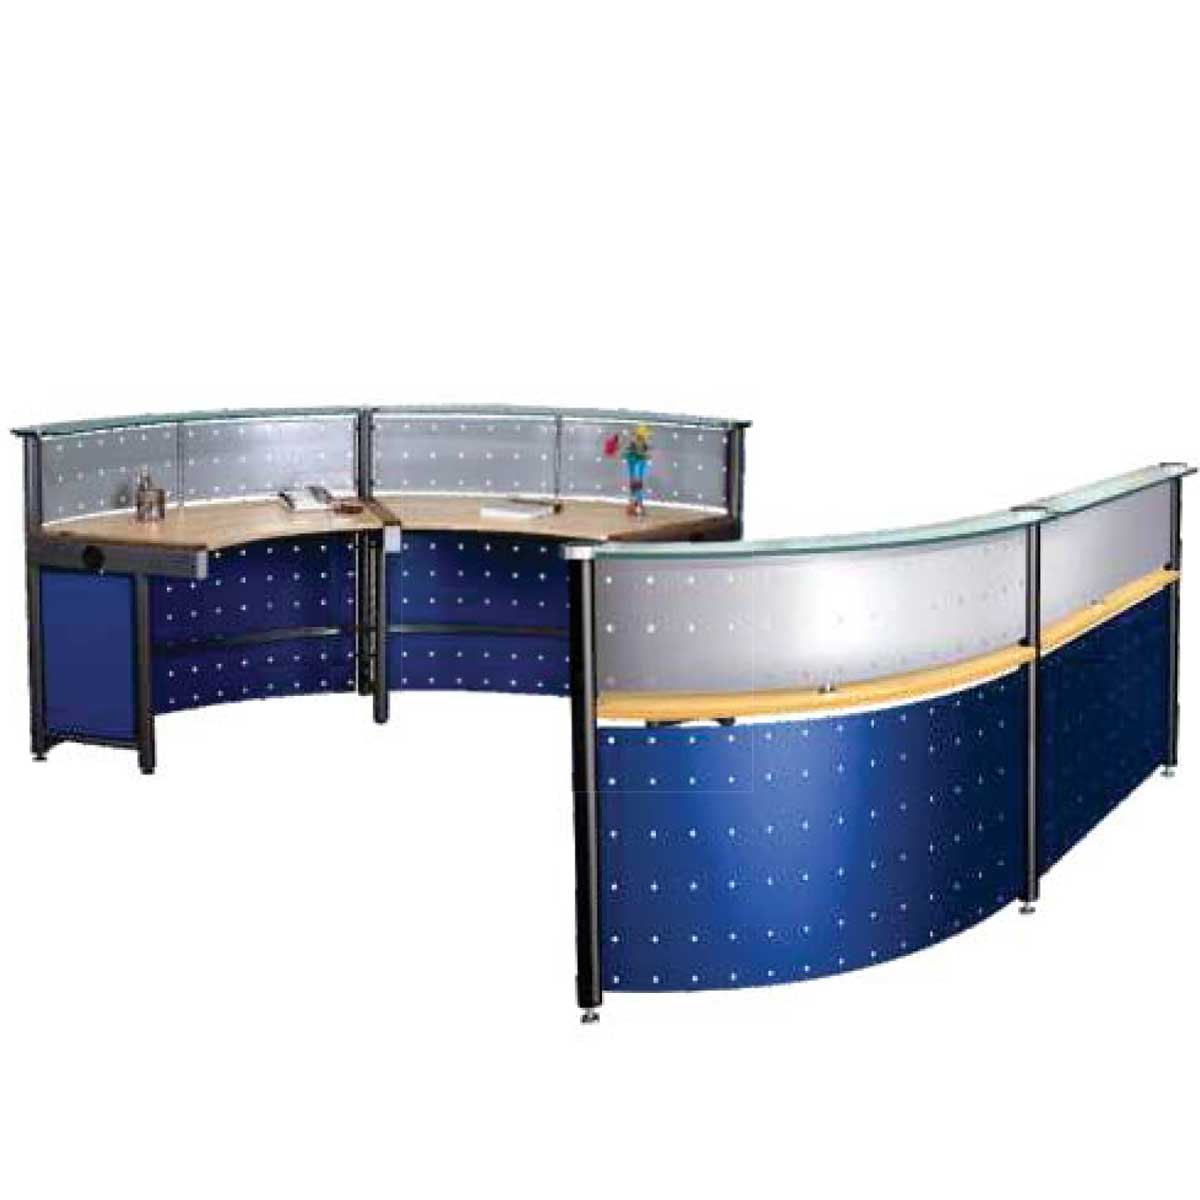 Reception Table Manufacturers, Suppliers in Noida City Center